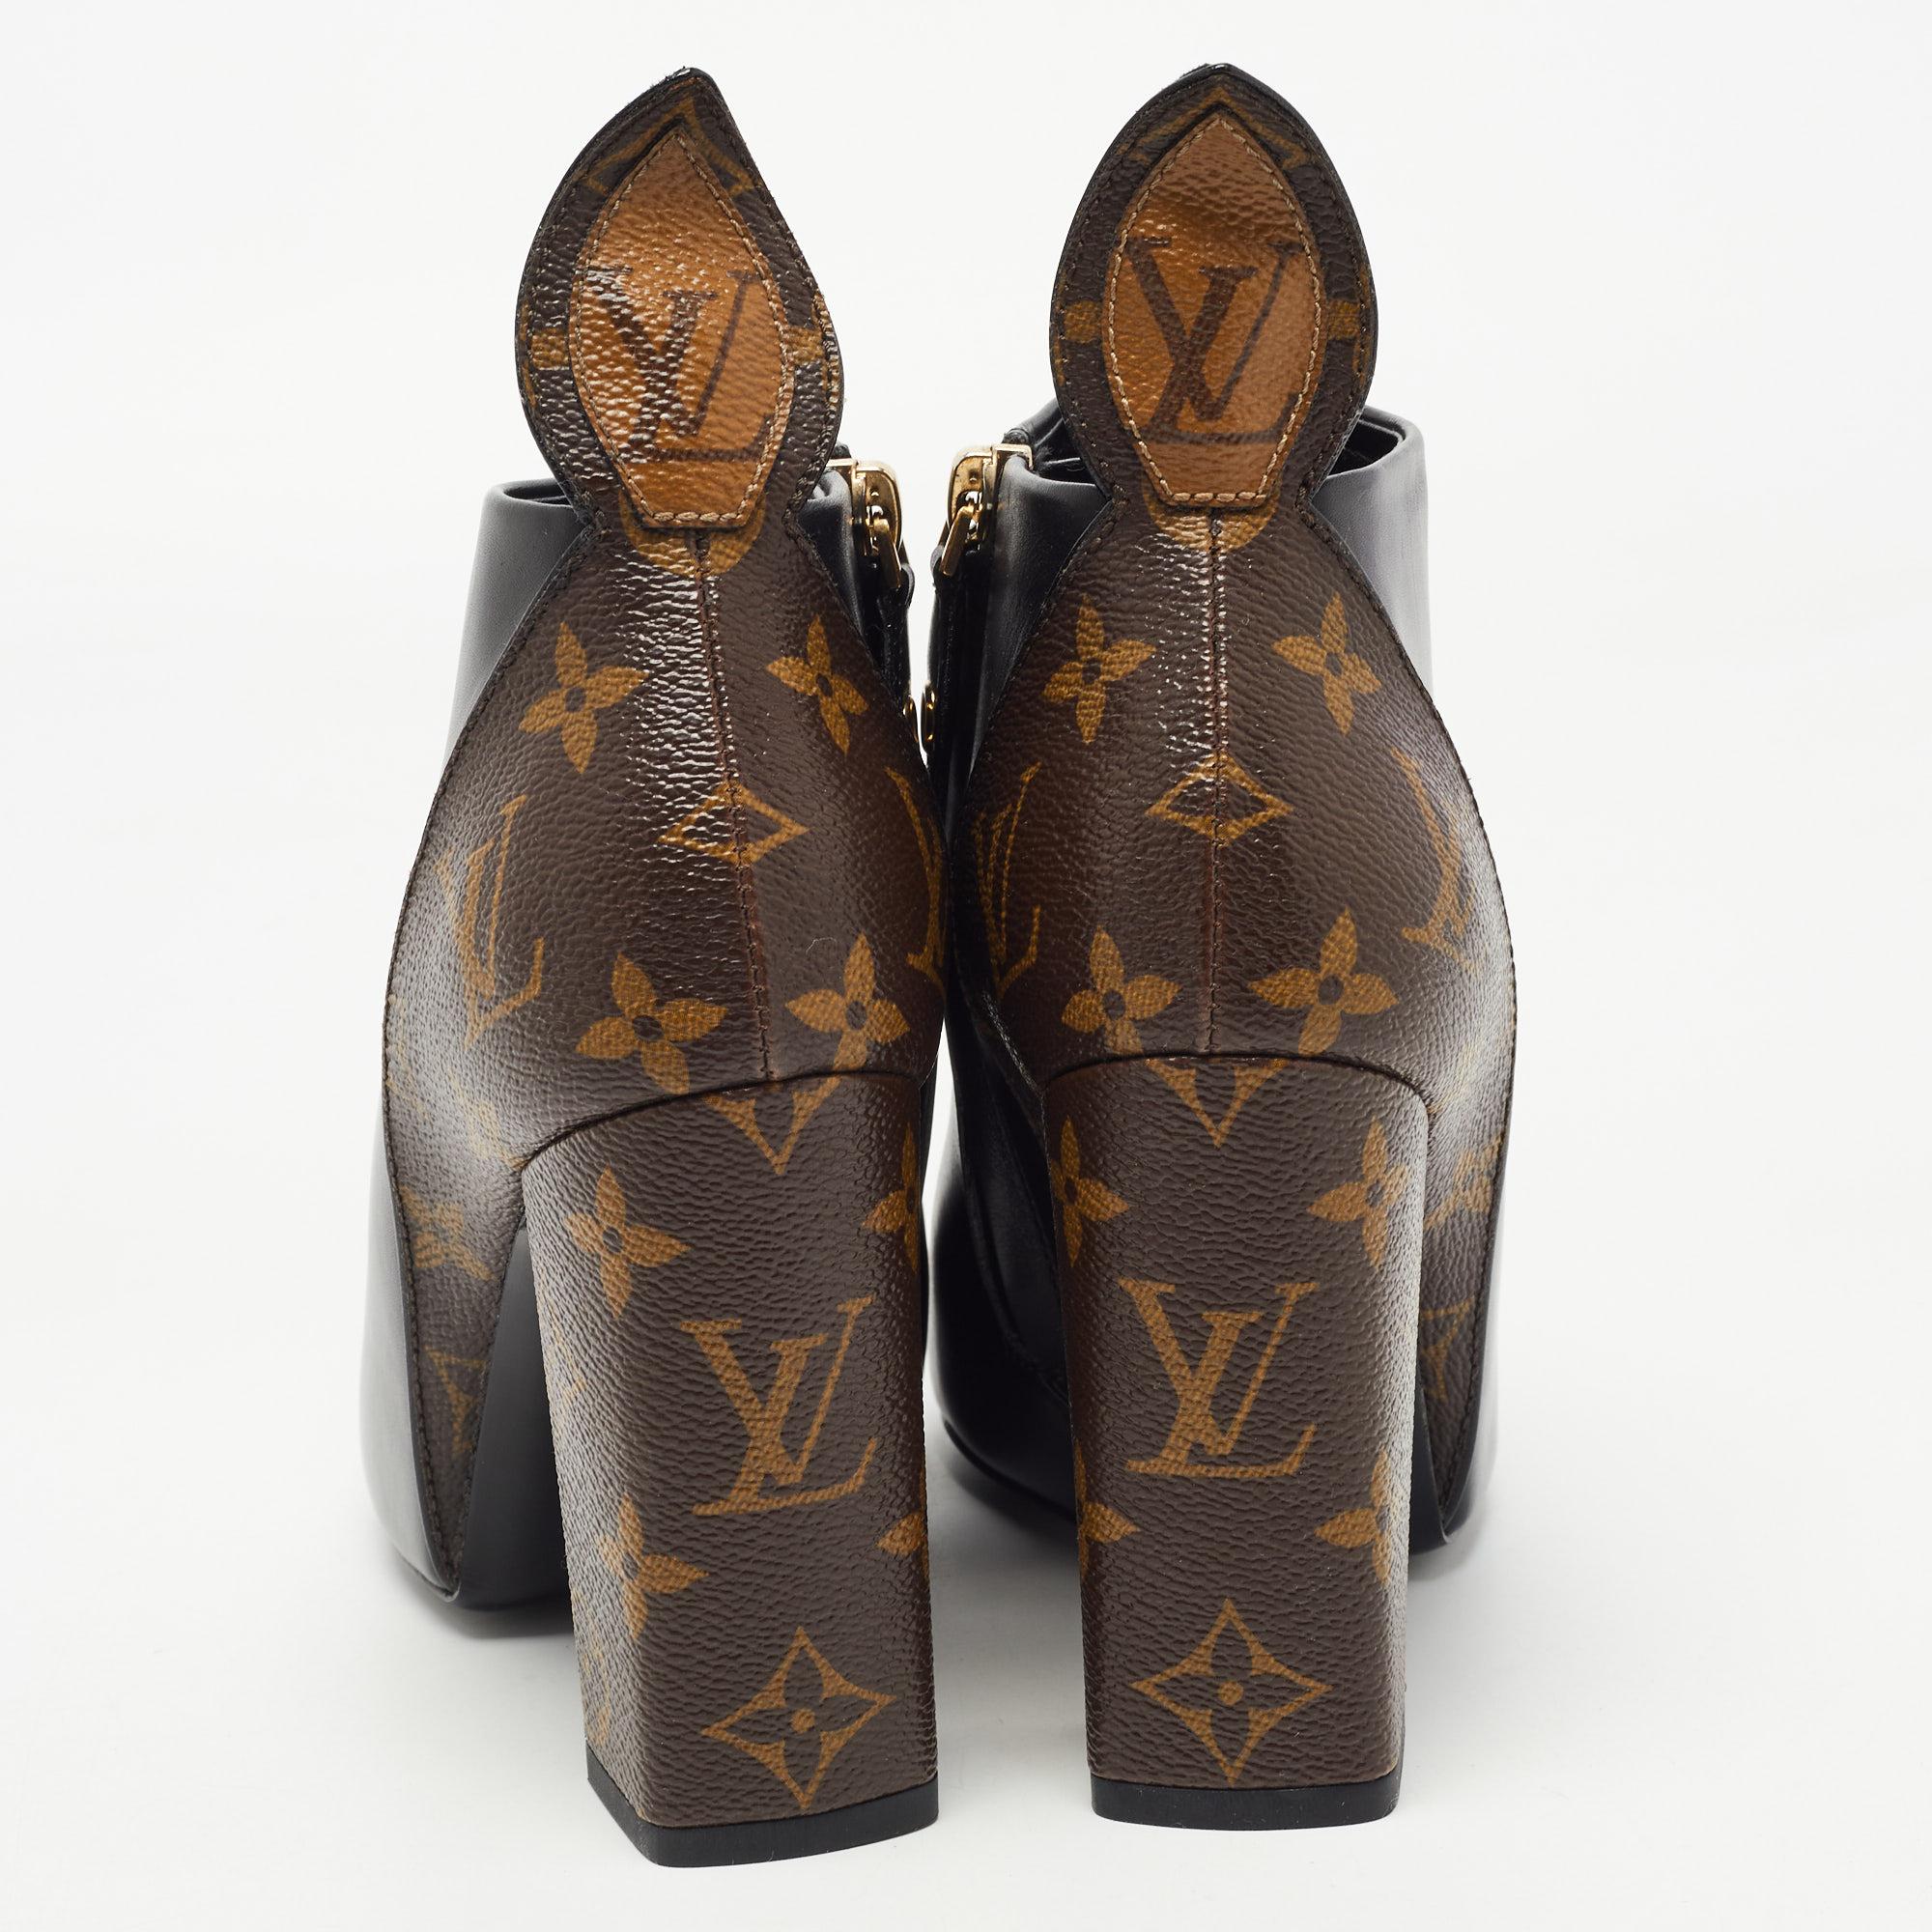 Louis Vuitton Monogram Canvas and Leather Rodeo Queen Ankle Boots Size 36 3